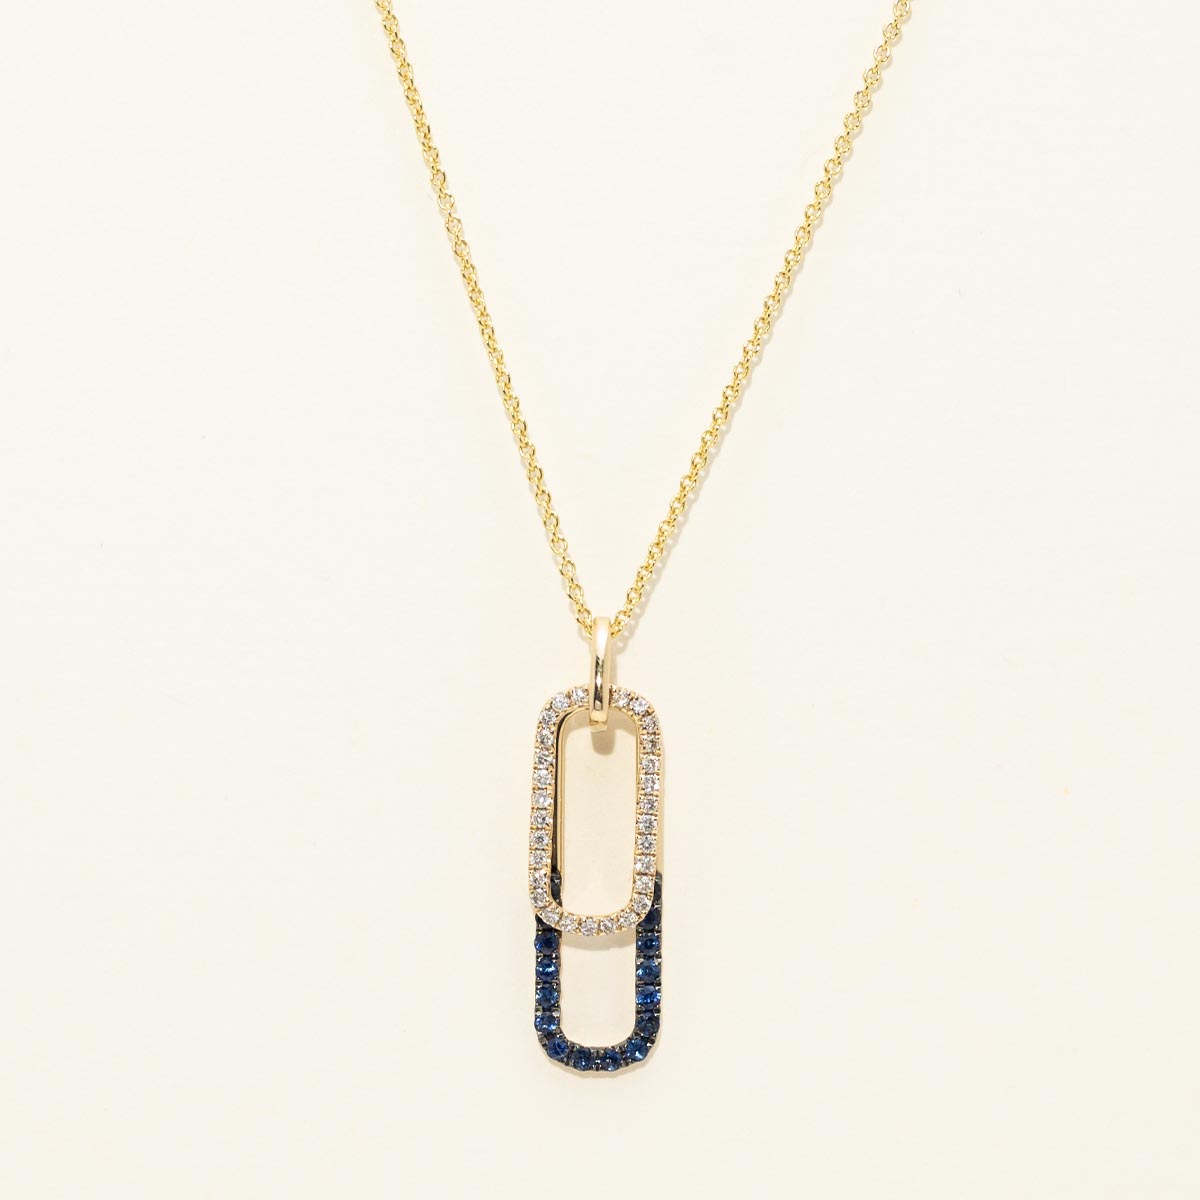 Sapphire Paperclip Necklace in 14kt Yellow Gold with Diamonds (1/10ct tw)